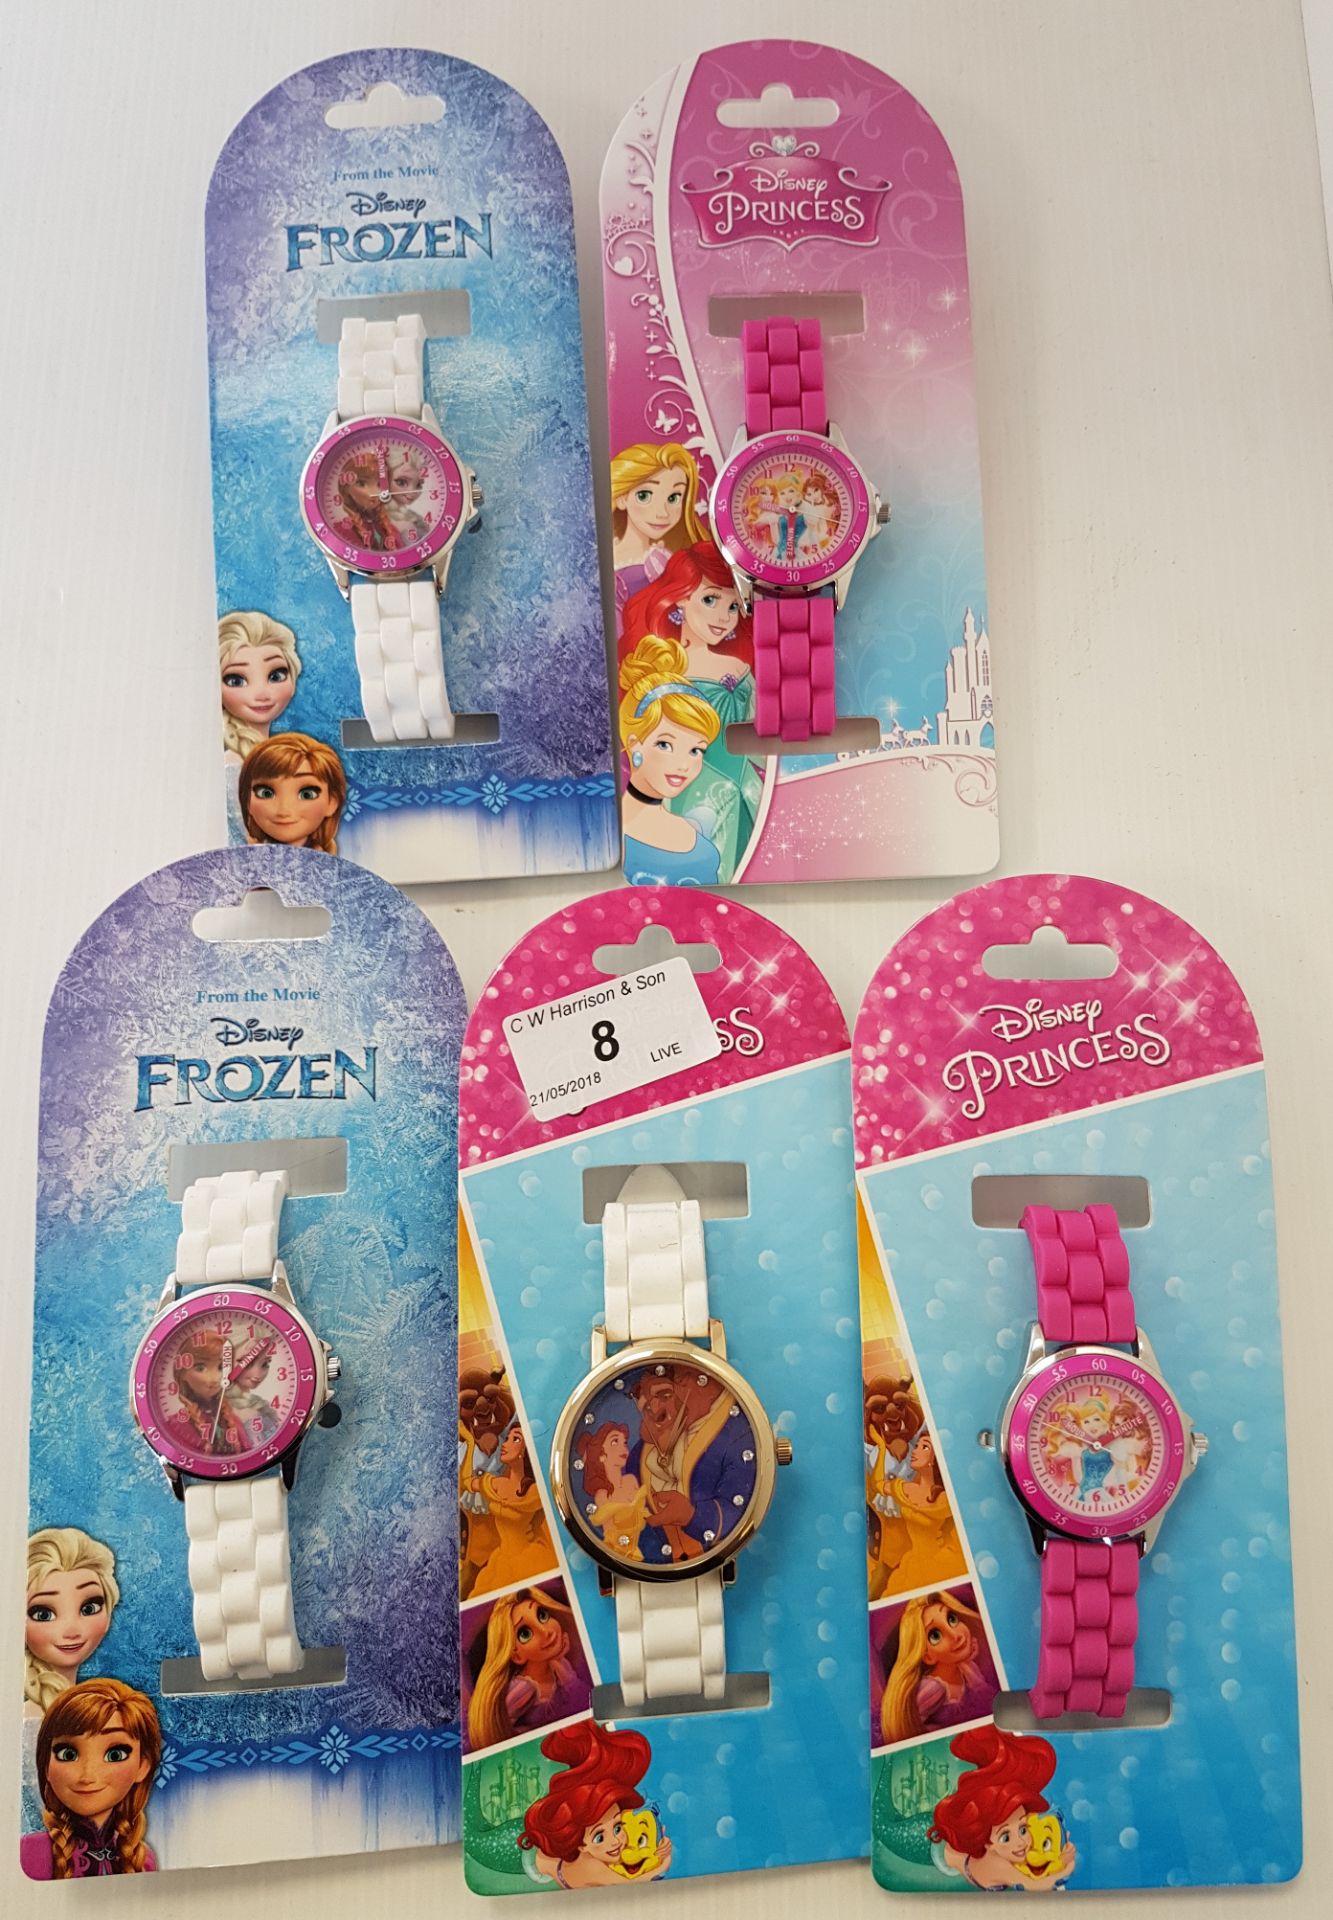 5 x Children's Disney watches including Beauty and The Beast, Frozen,